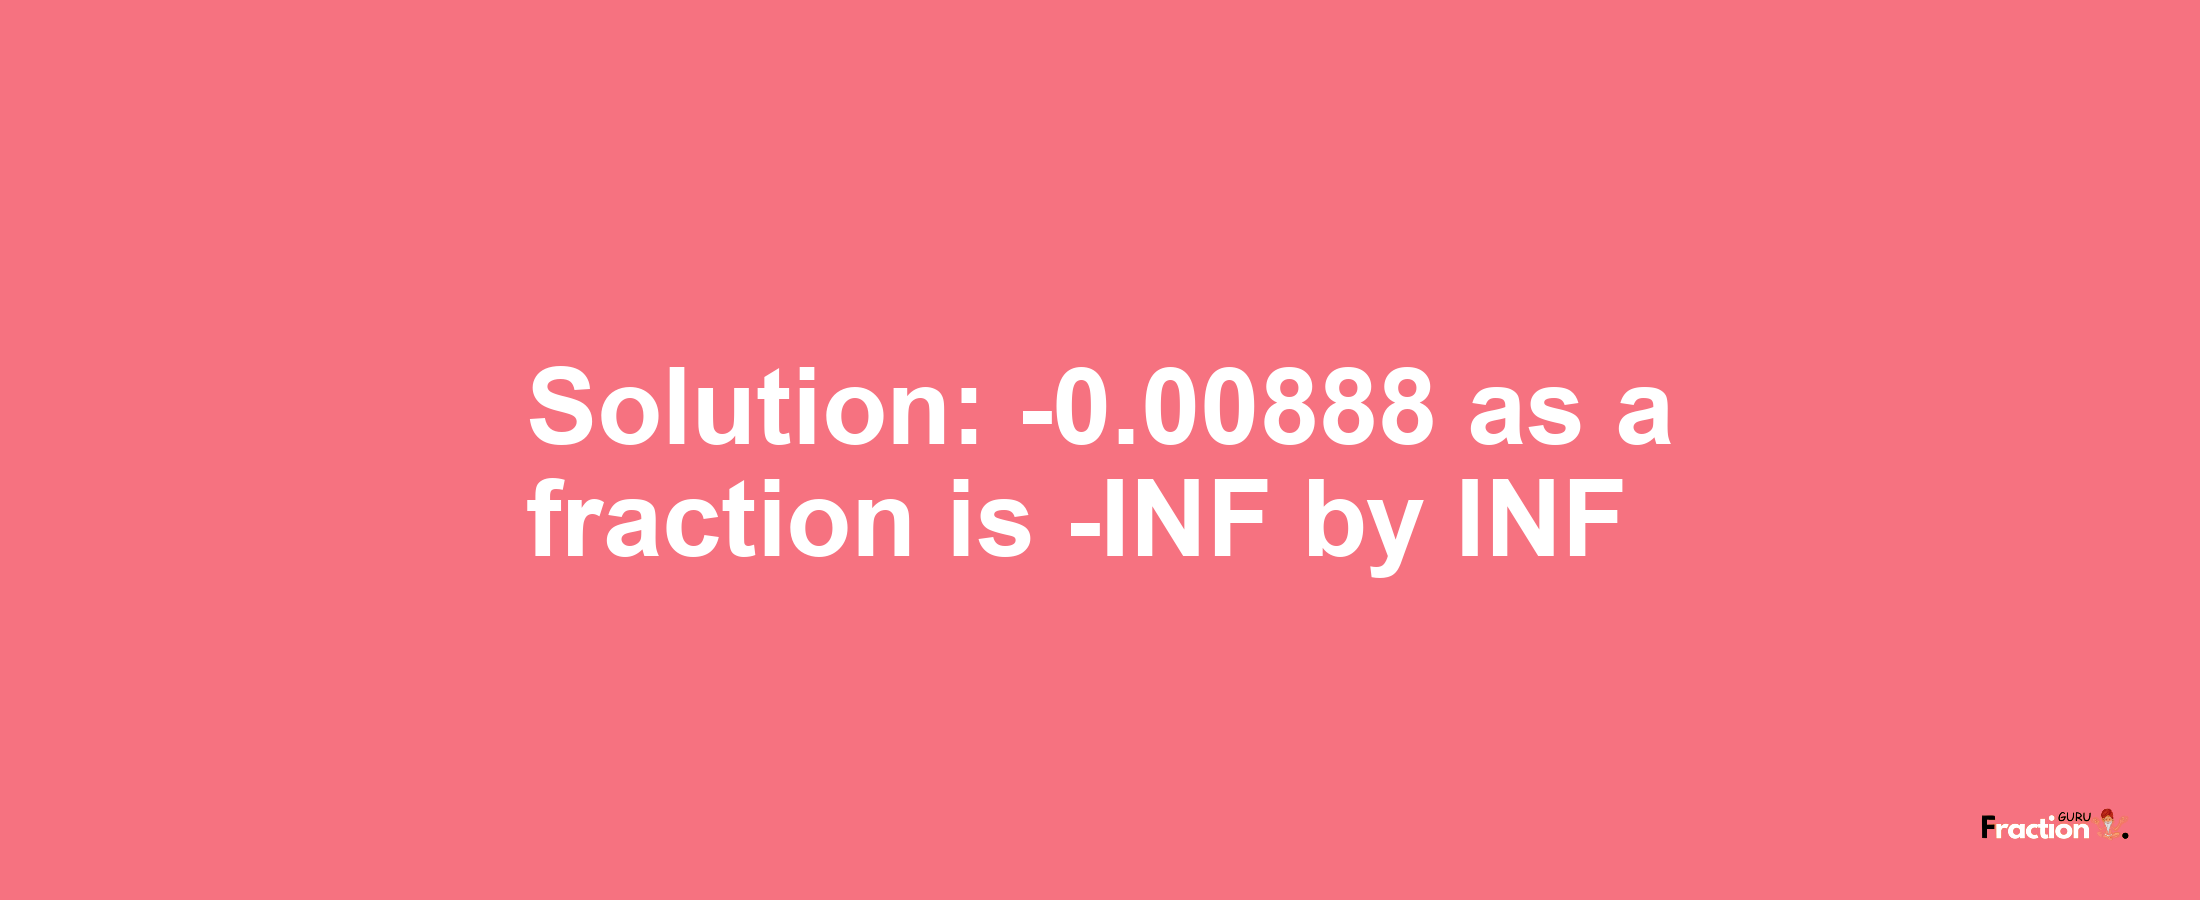 Solution:-0.00888 as a fraction is -INF/INF